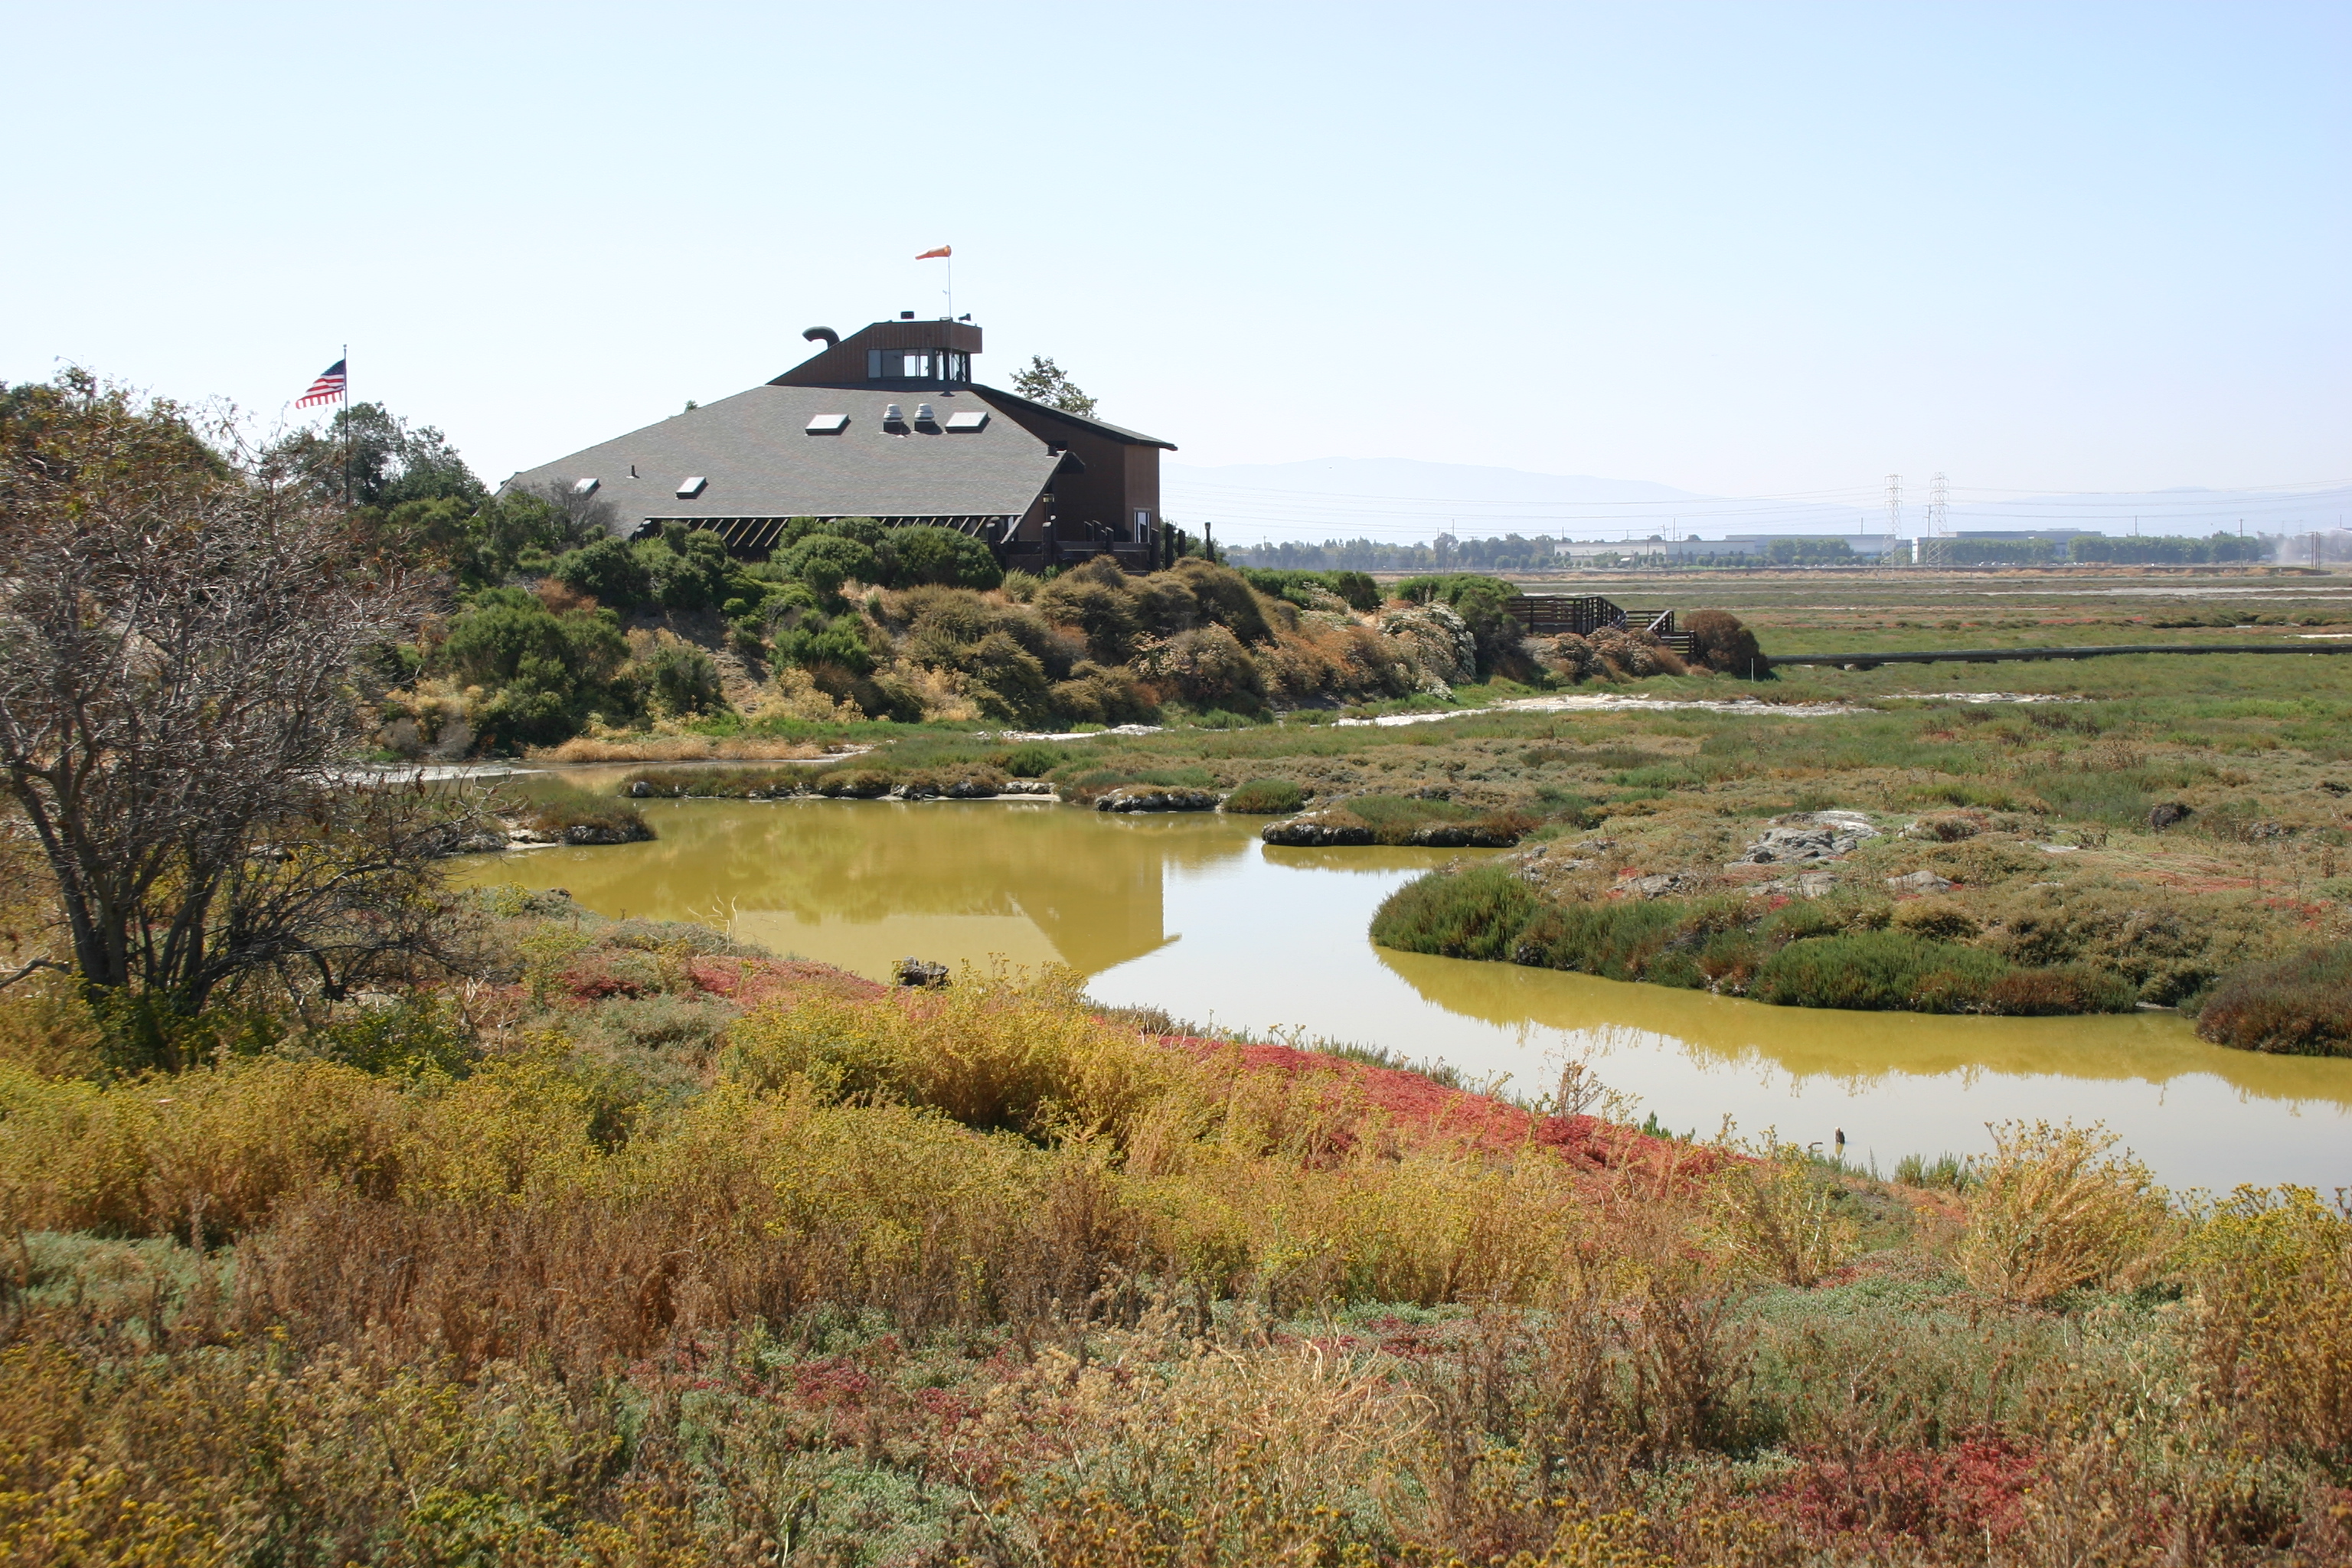 A colorful landscape and the stagnant green water of the salt marsh surround the Environmental Education Center in Alviso, California.